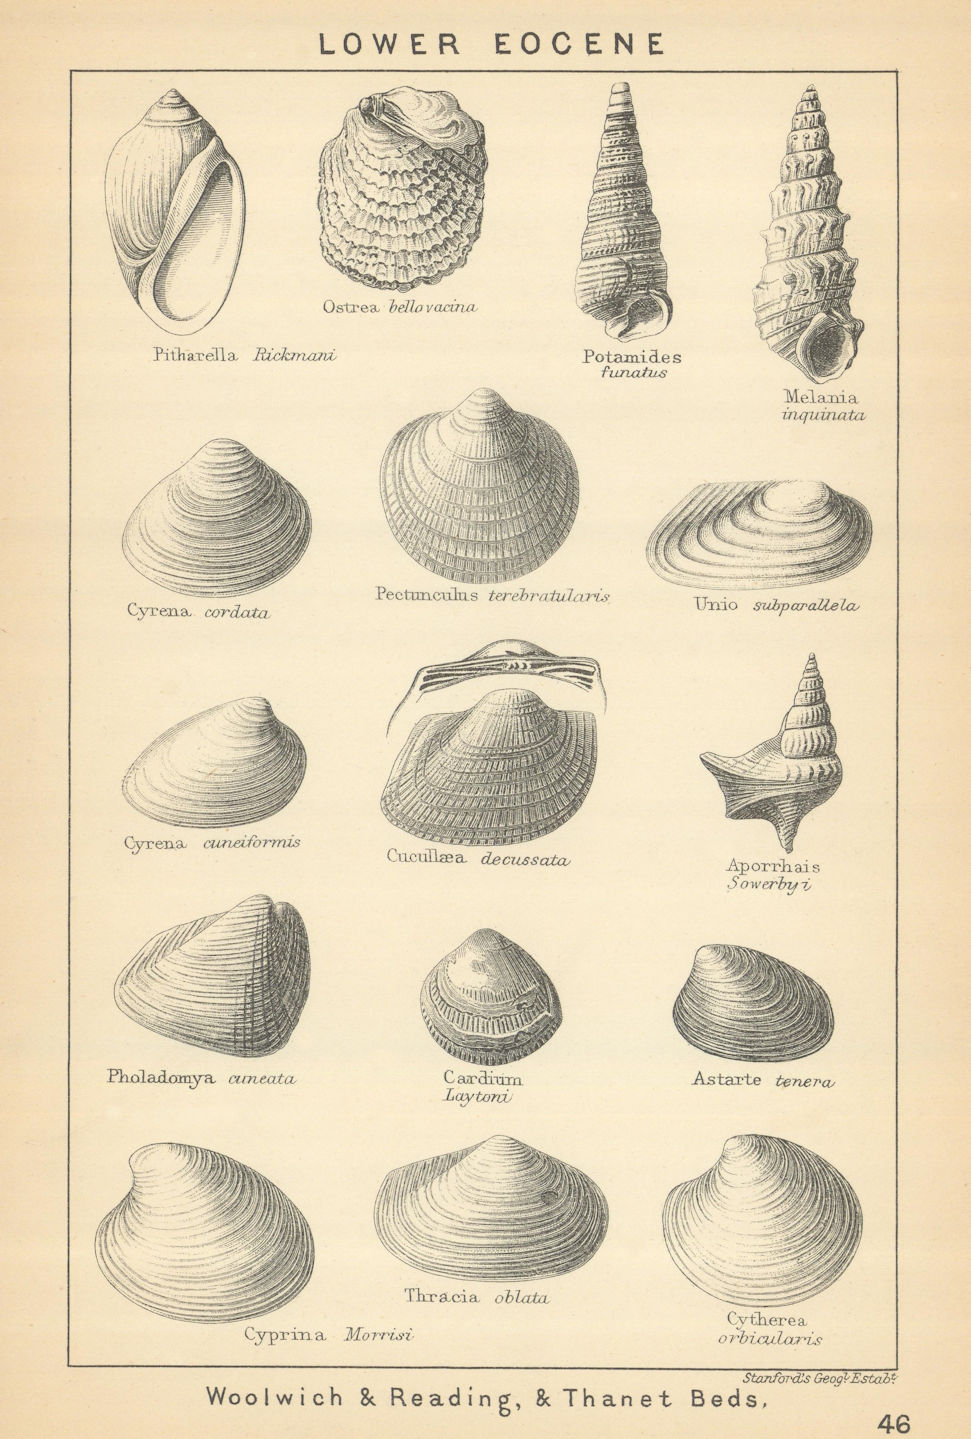 BRITISH FOSSILS. Lower Eocene - Woolwich & Reading, & Thanet Beds. STANFORD 1904